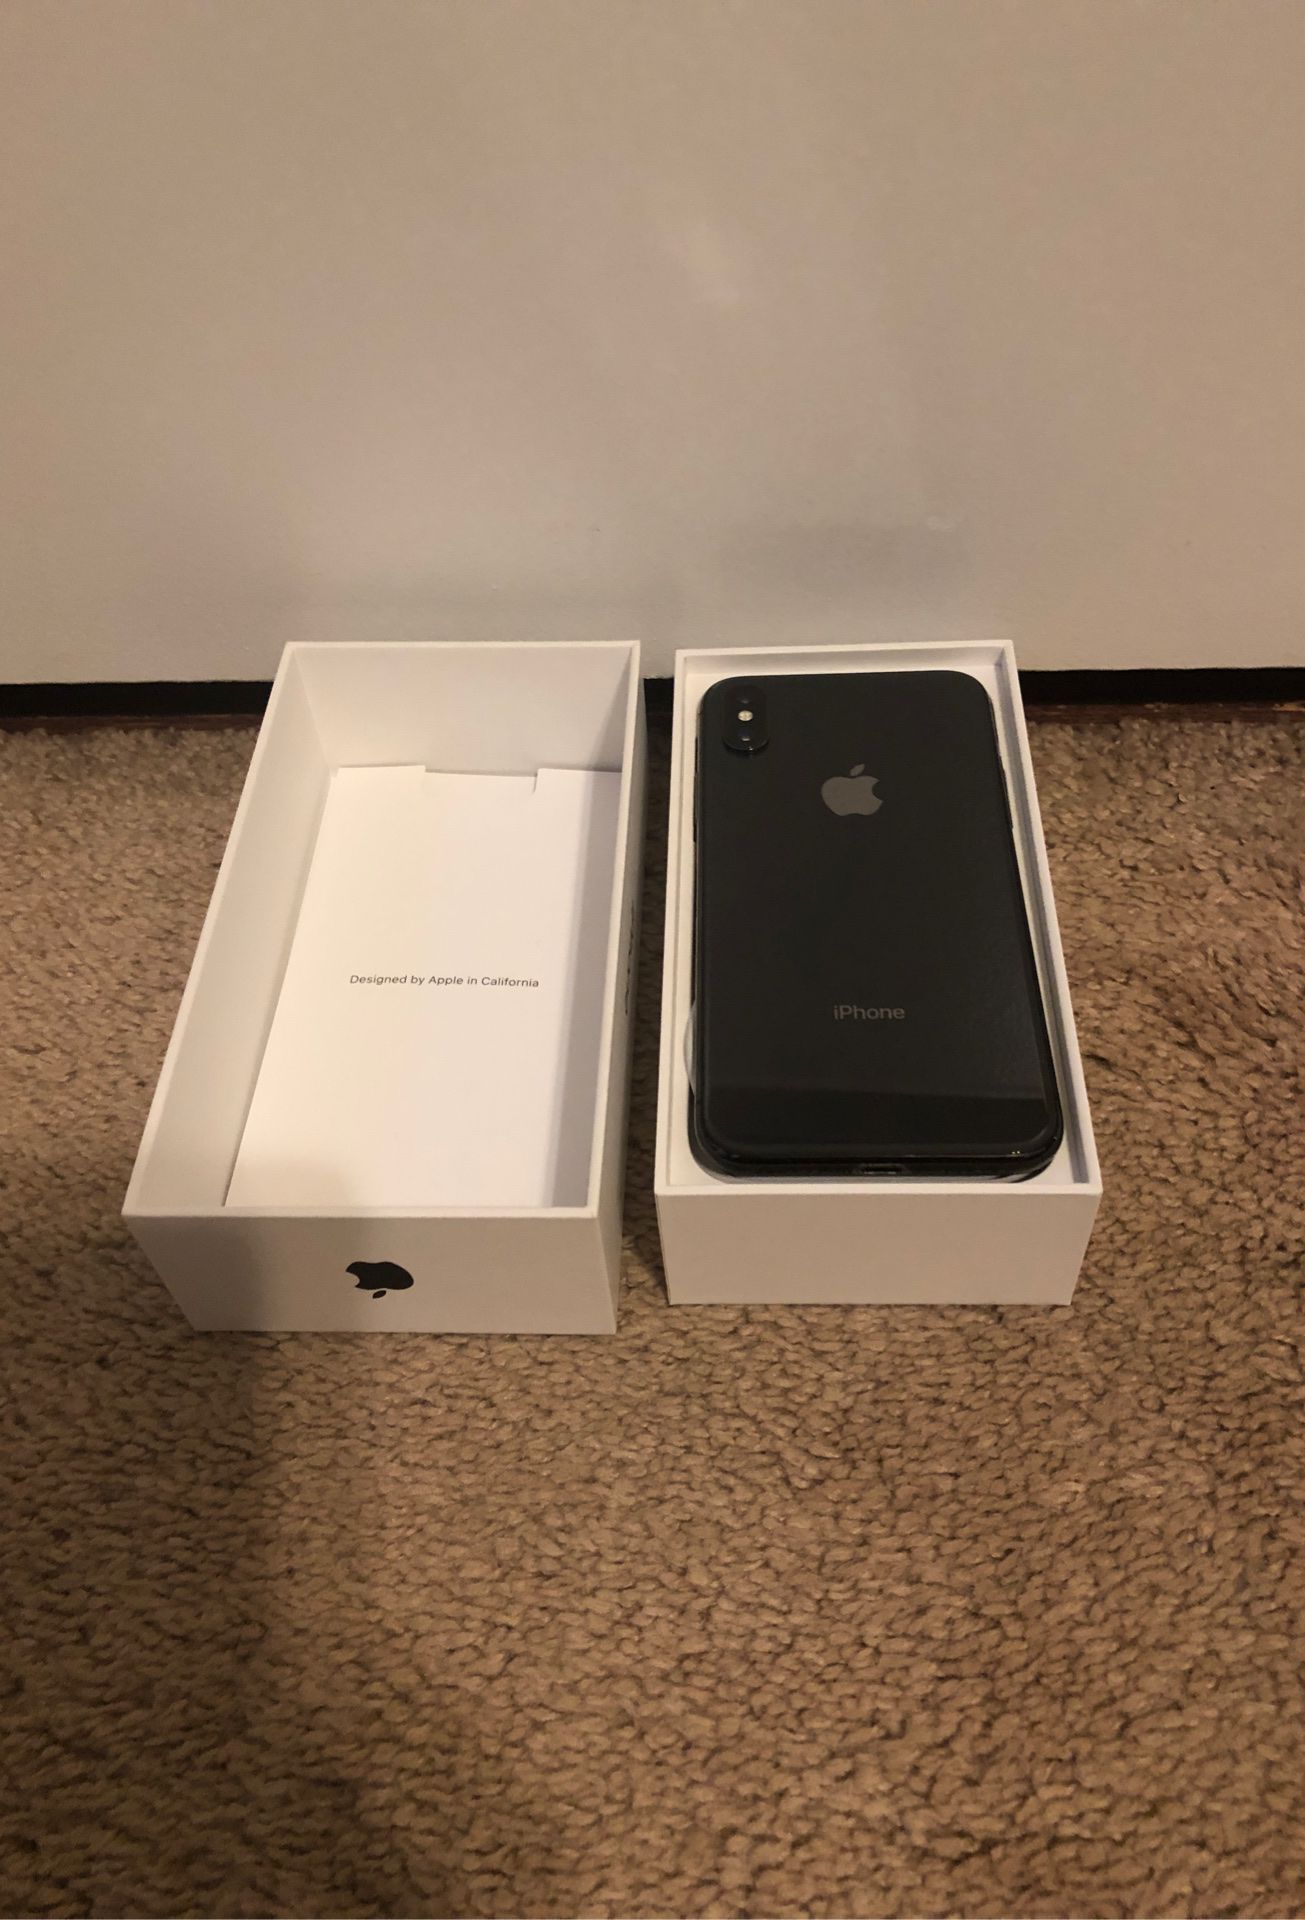 Apple IPhoneX 256GB. Phone locked Carrier AT&T